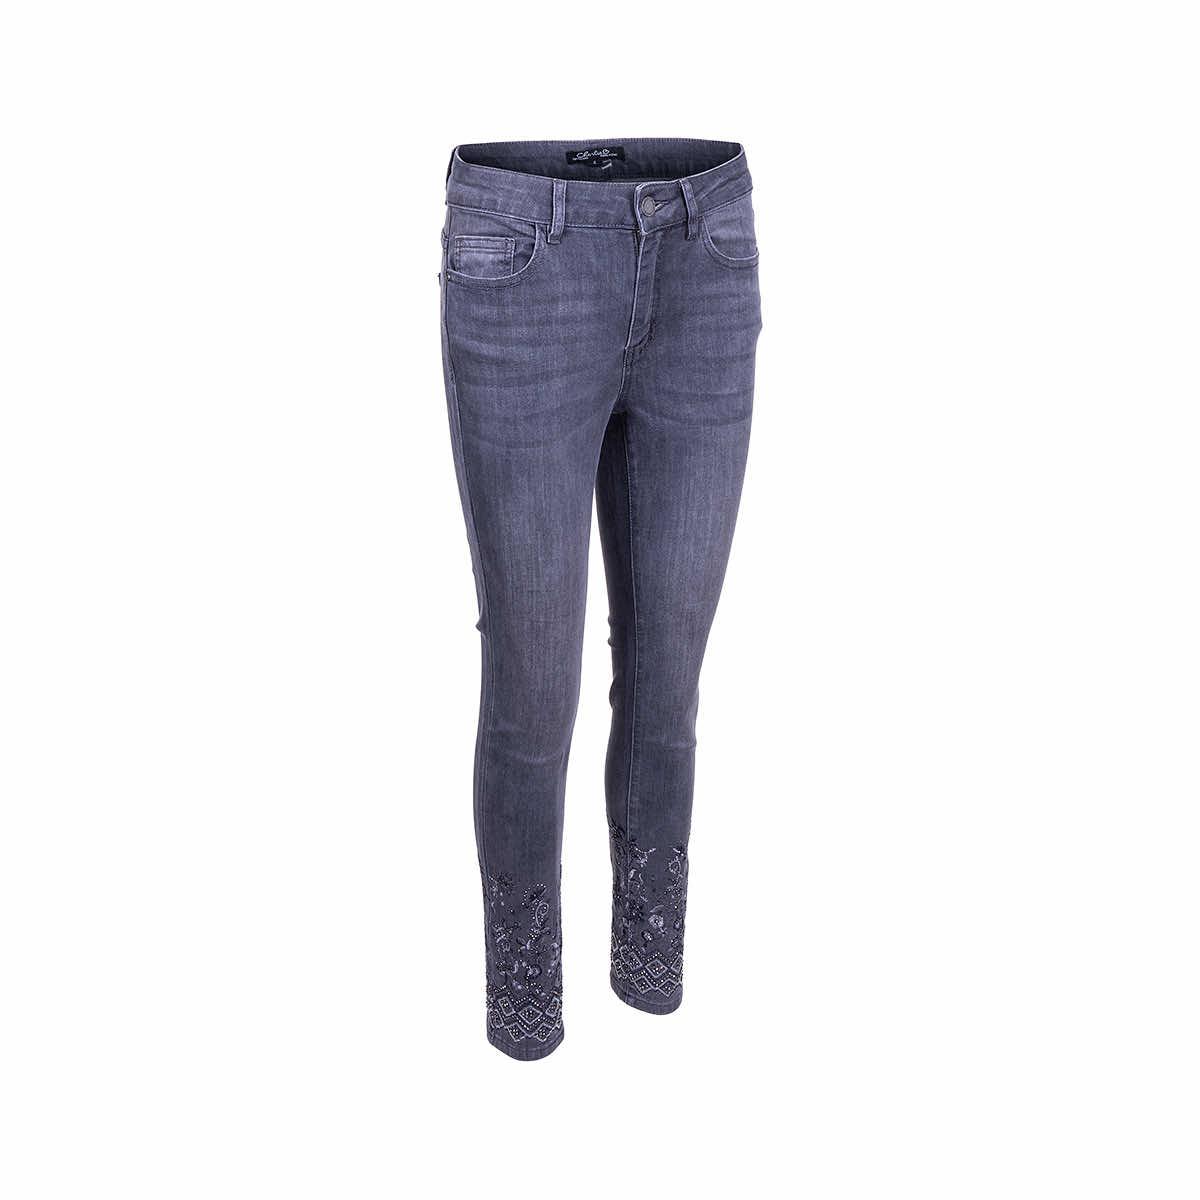  Women's Embroidered Hem Jeans